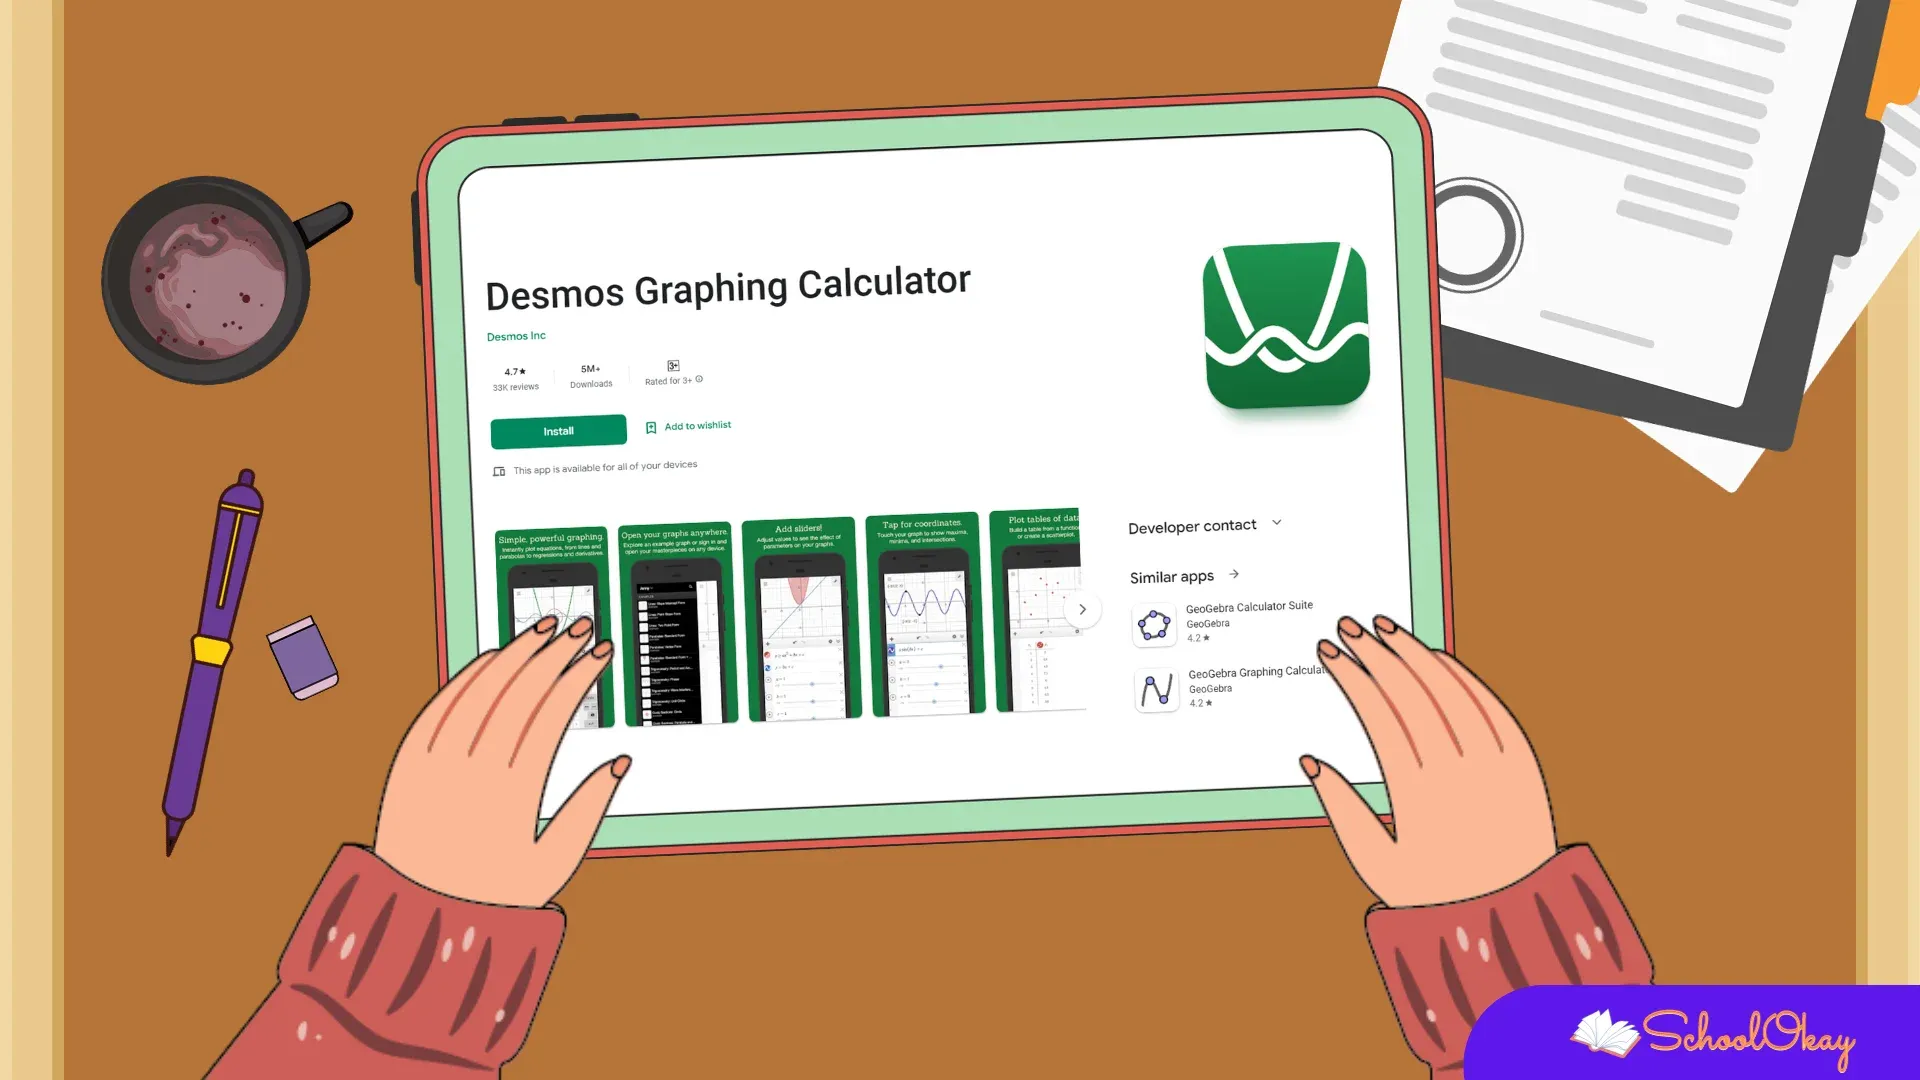 Desmos graphing calculator apps and website  